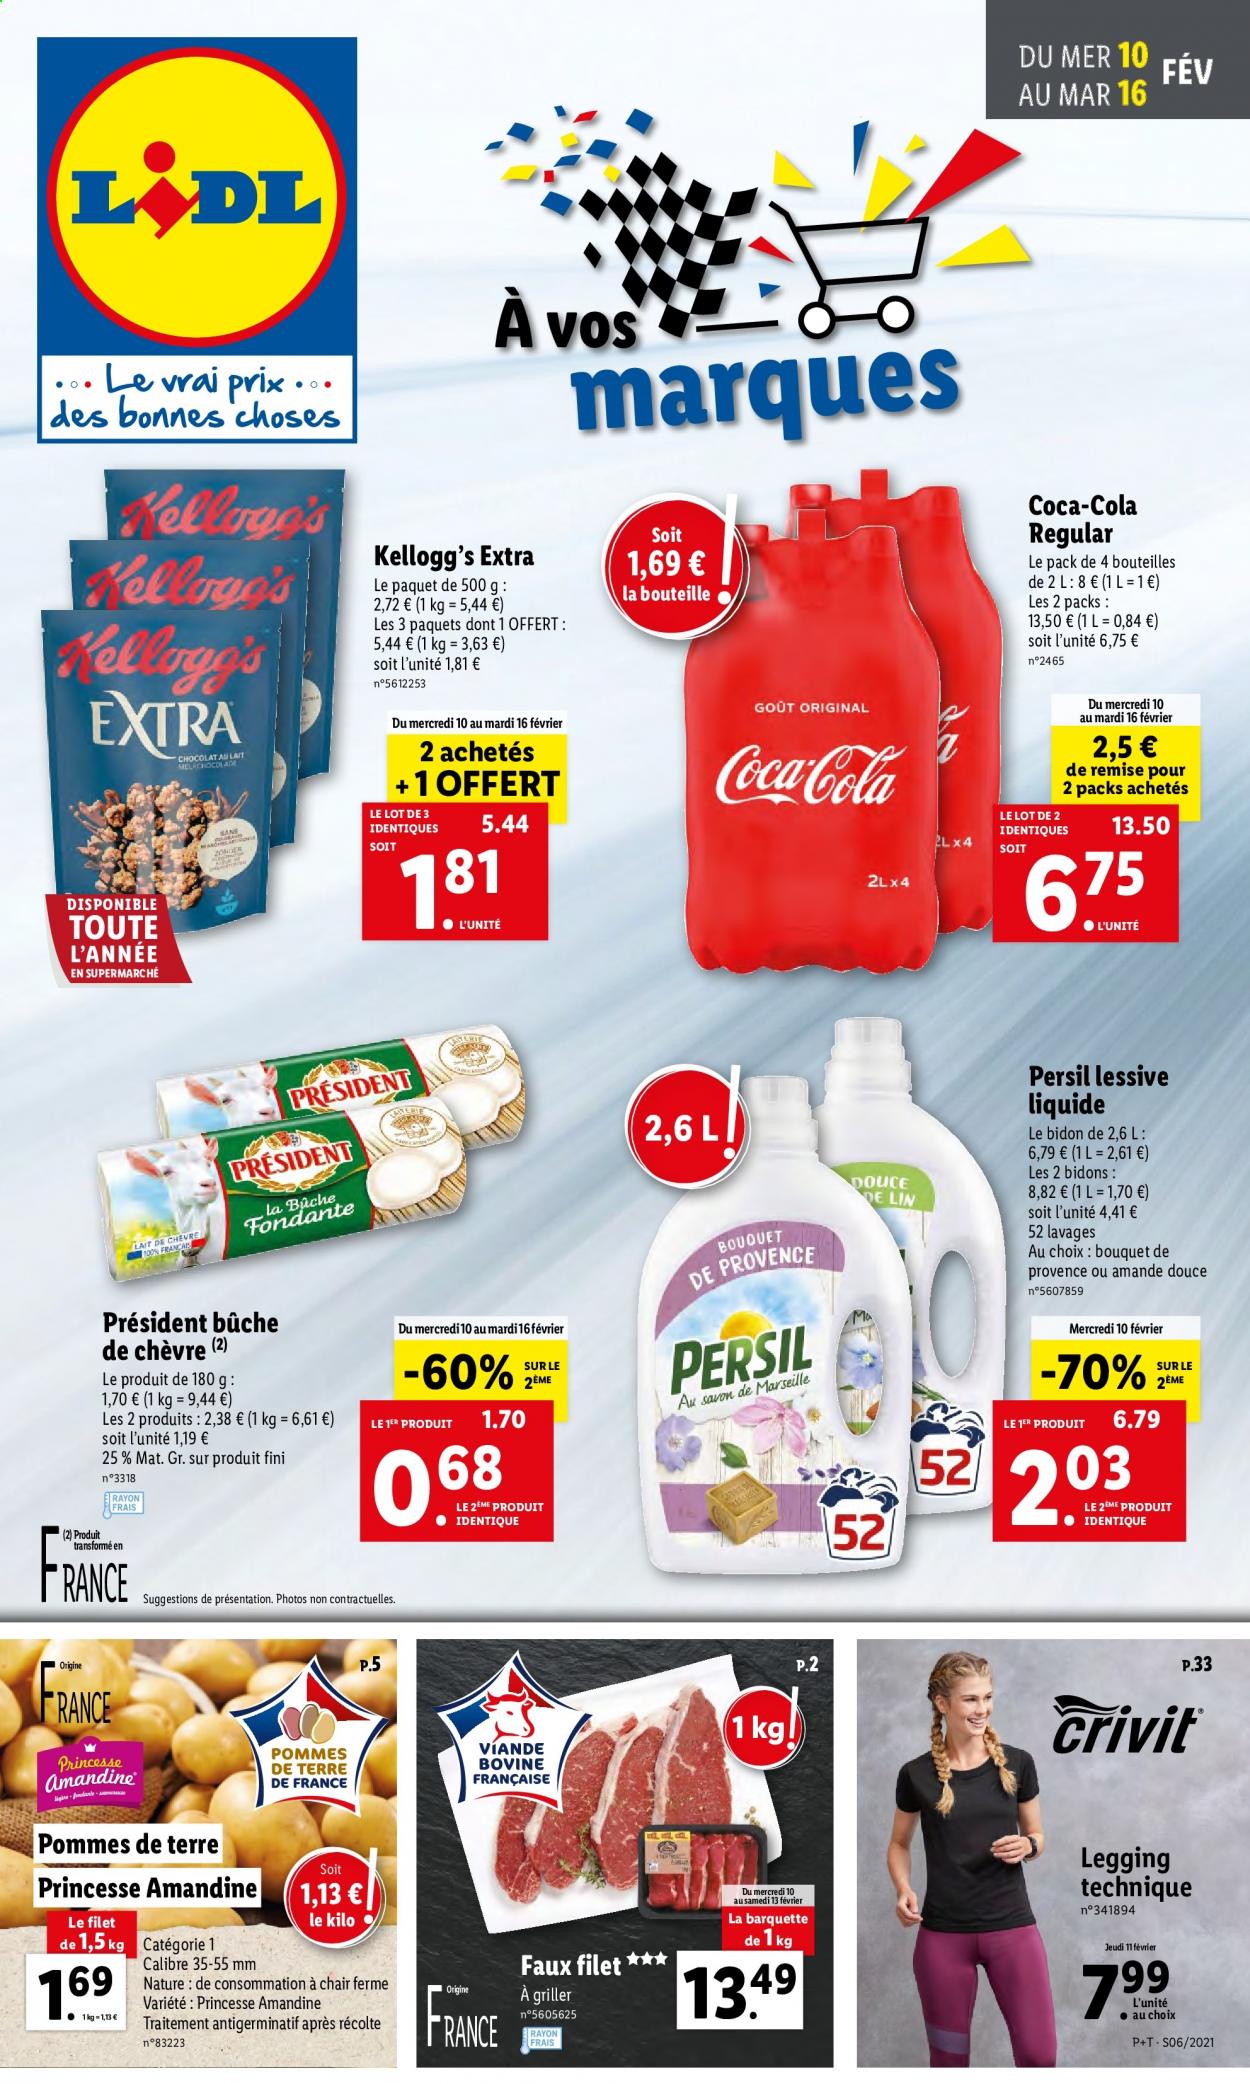 Catalogue Lidl - 10.02.2021 - 16.02.2021. Page 1.